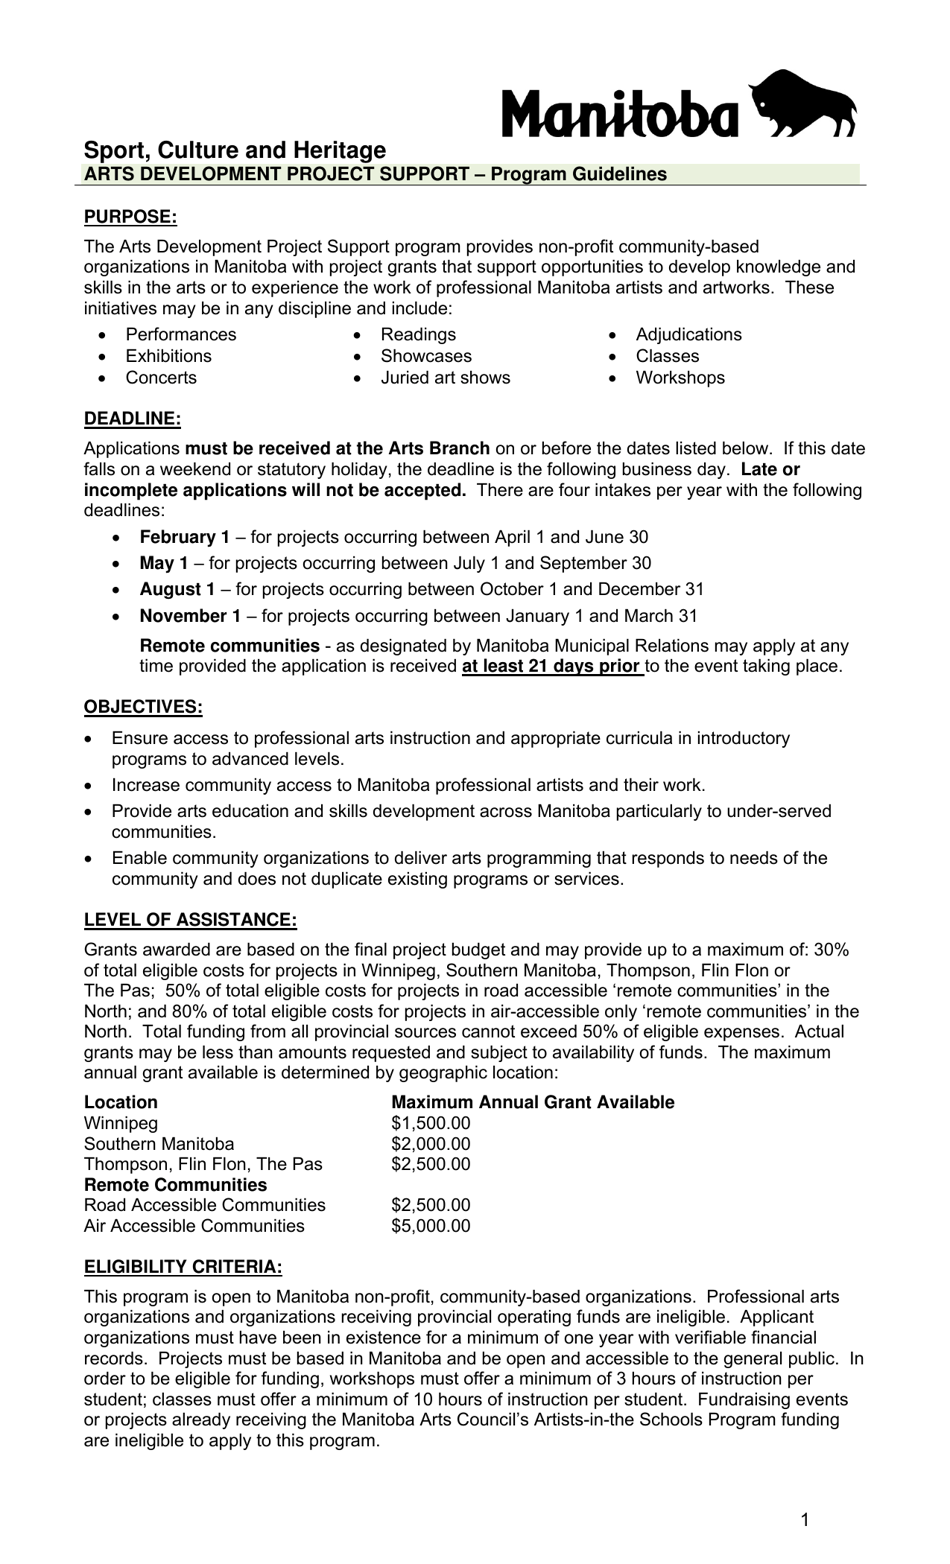 Arts Development Project Support Application Form - Manitoba, Canada, Page 1